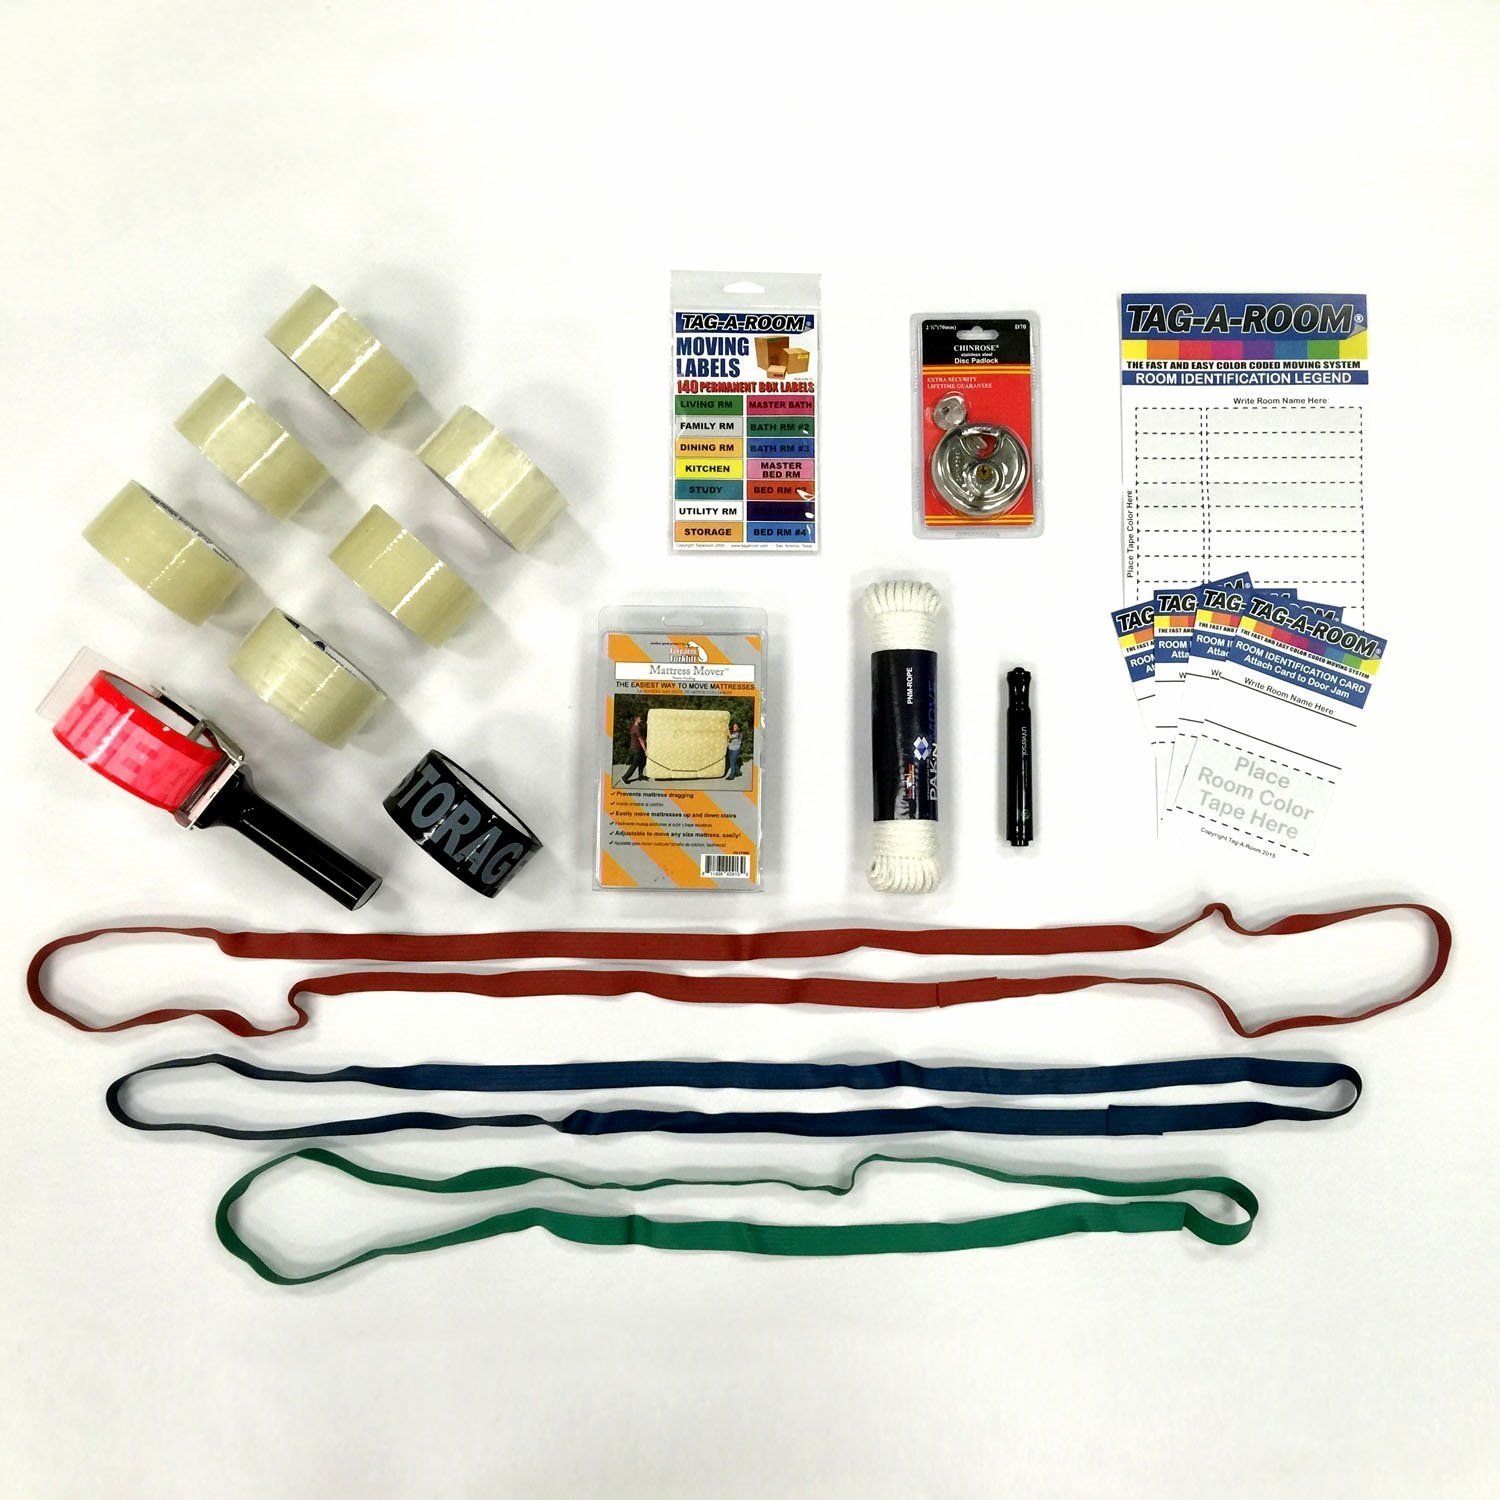 Moving Supplies "Do It Yourself" Moving Kit Bundle